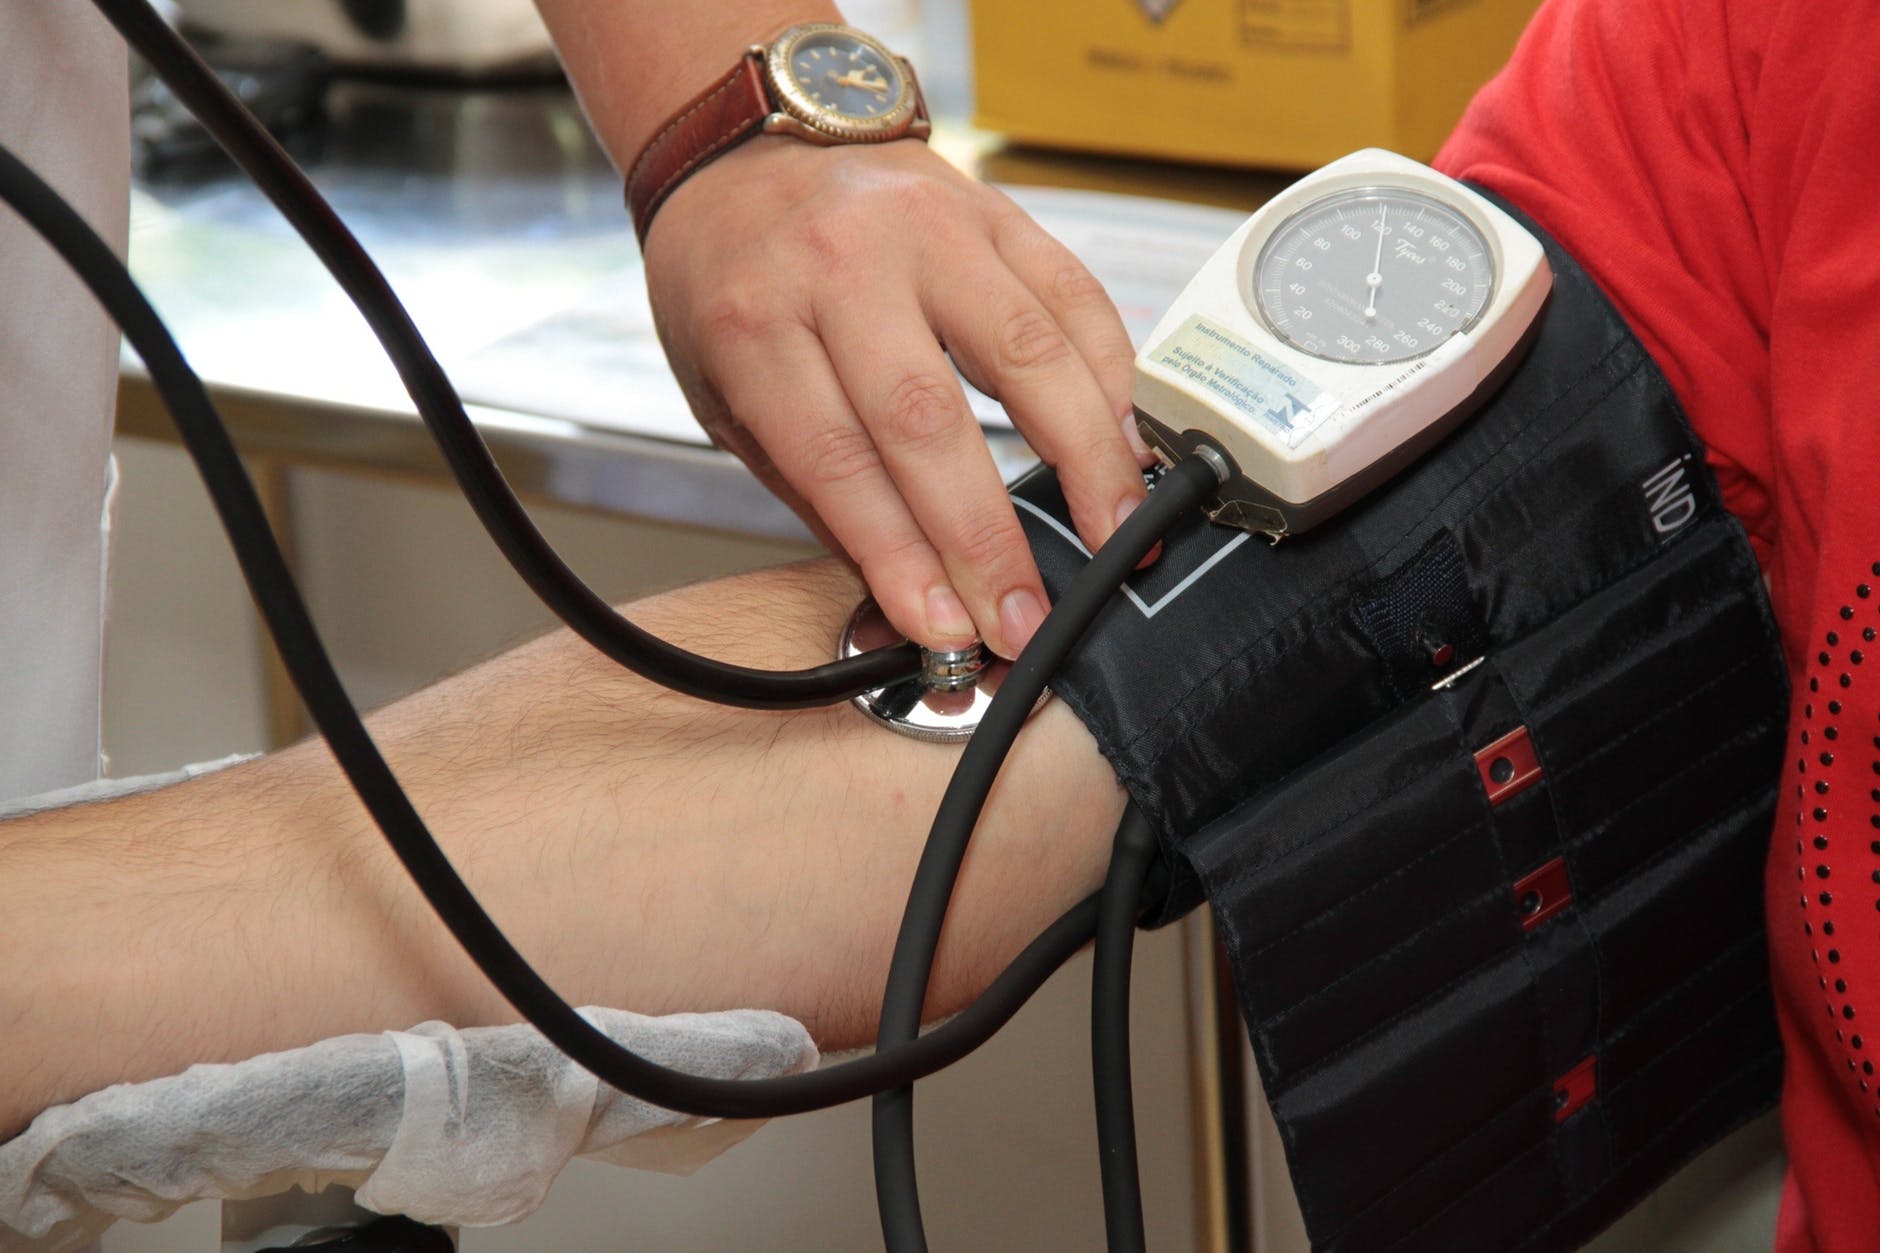 Weekly Column from Johanna Hicks for May 10th, 2019: High Blood Pressure: Do You Know Your Numbers?